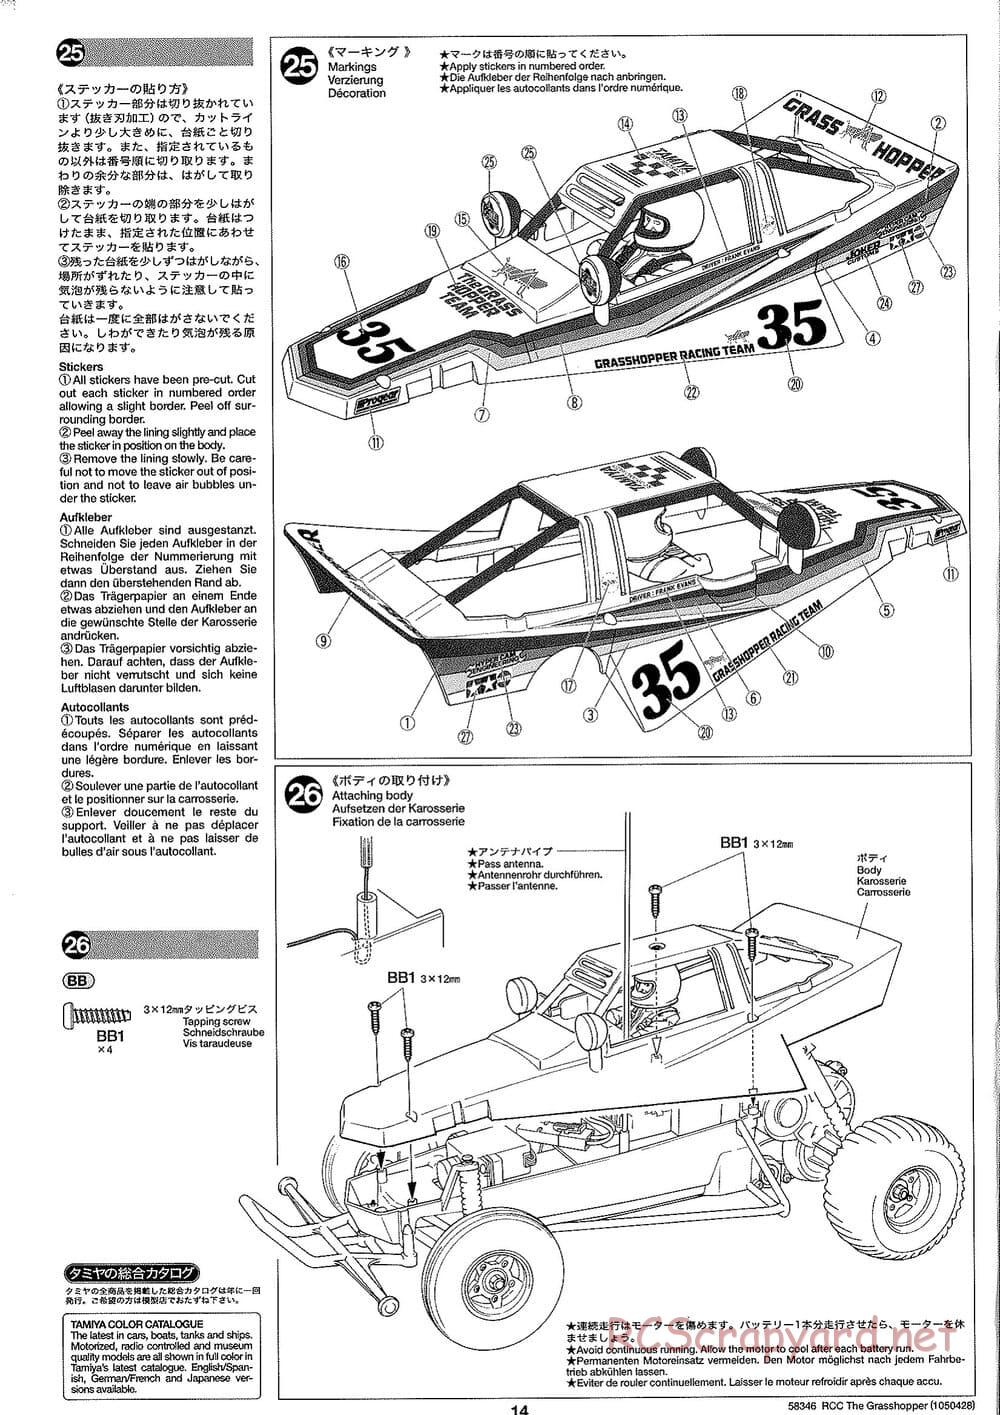 Tamiya - The Grasshopper (2005) - GH Chassis - Manual - Page 14